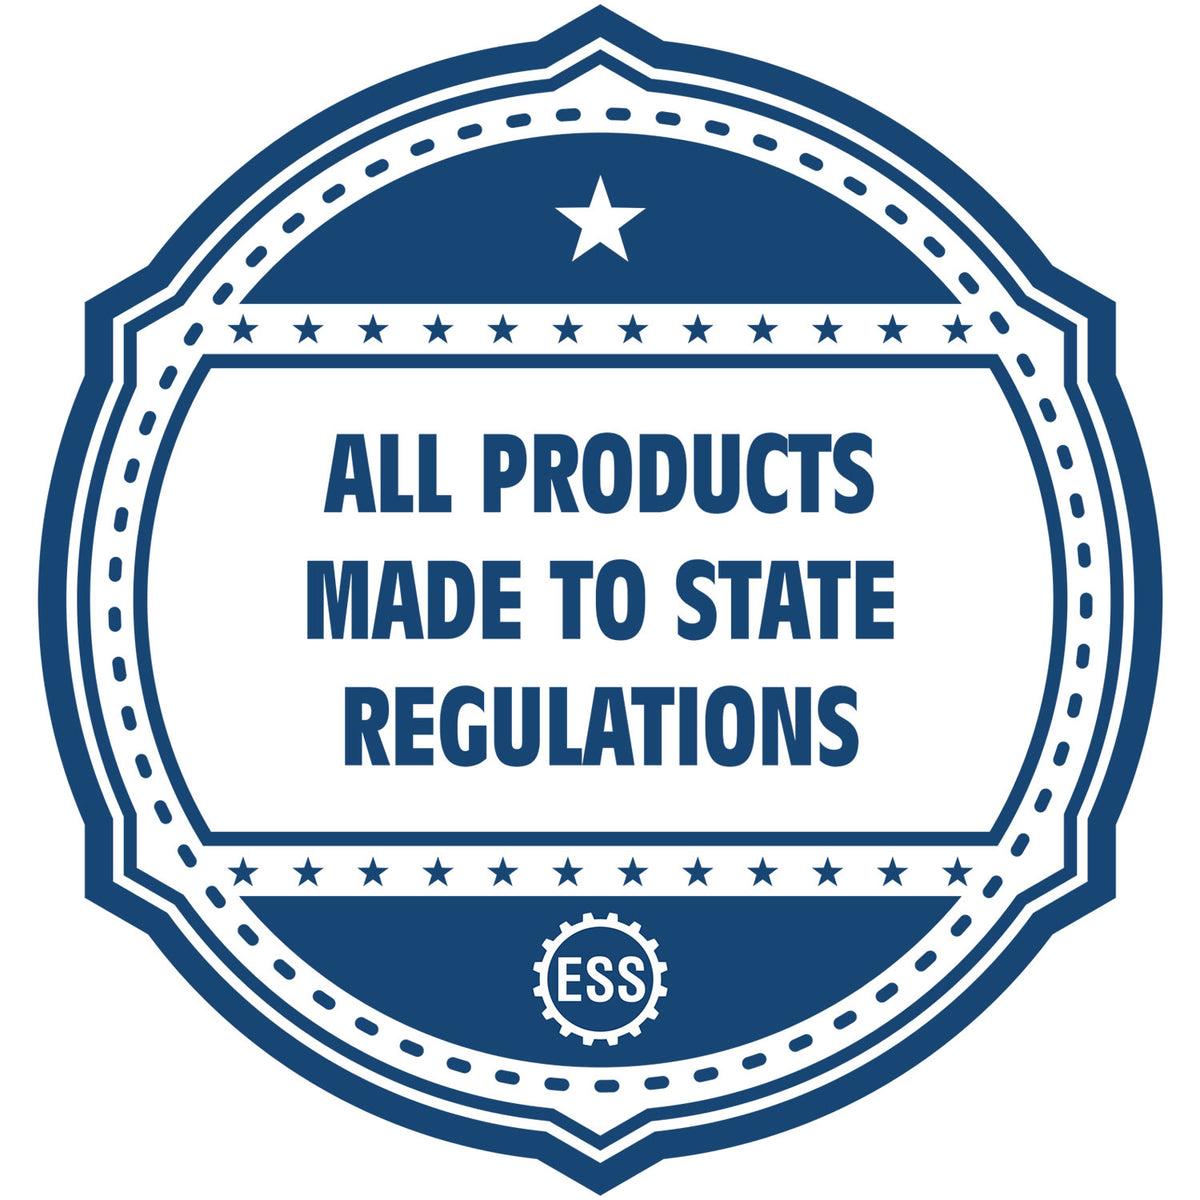 A blue icon or badge for the Gift Missouri Architect Seal showing that this product is made in compliance with state regulations.